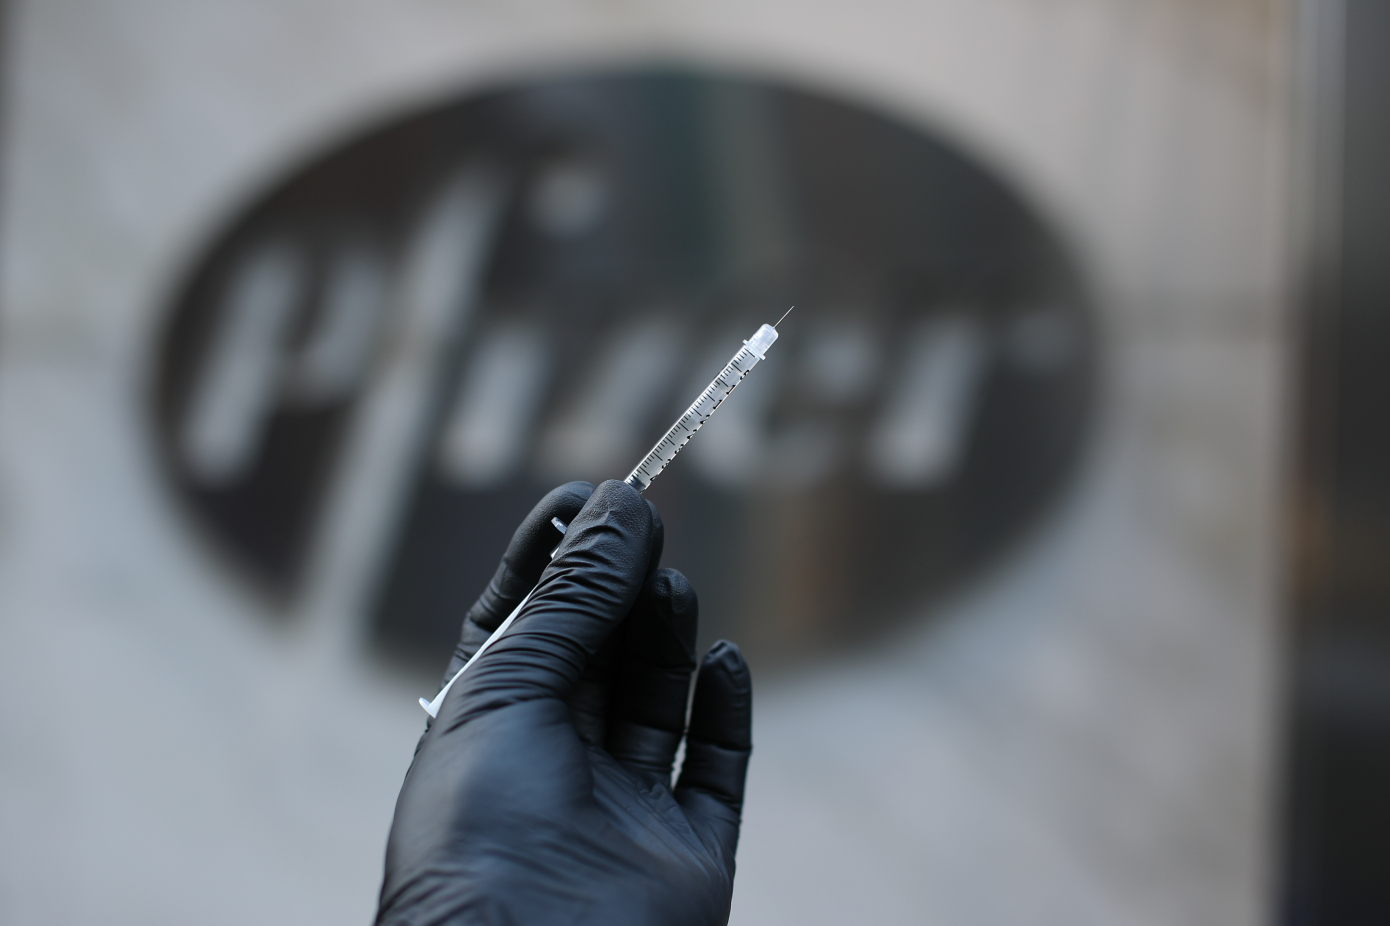 Twitter rolls out vaccine misinformation warning